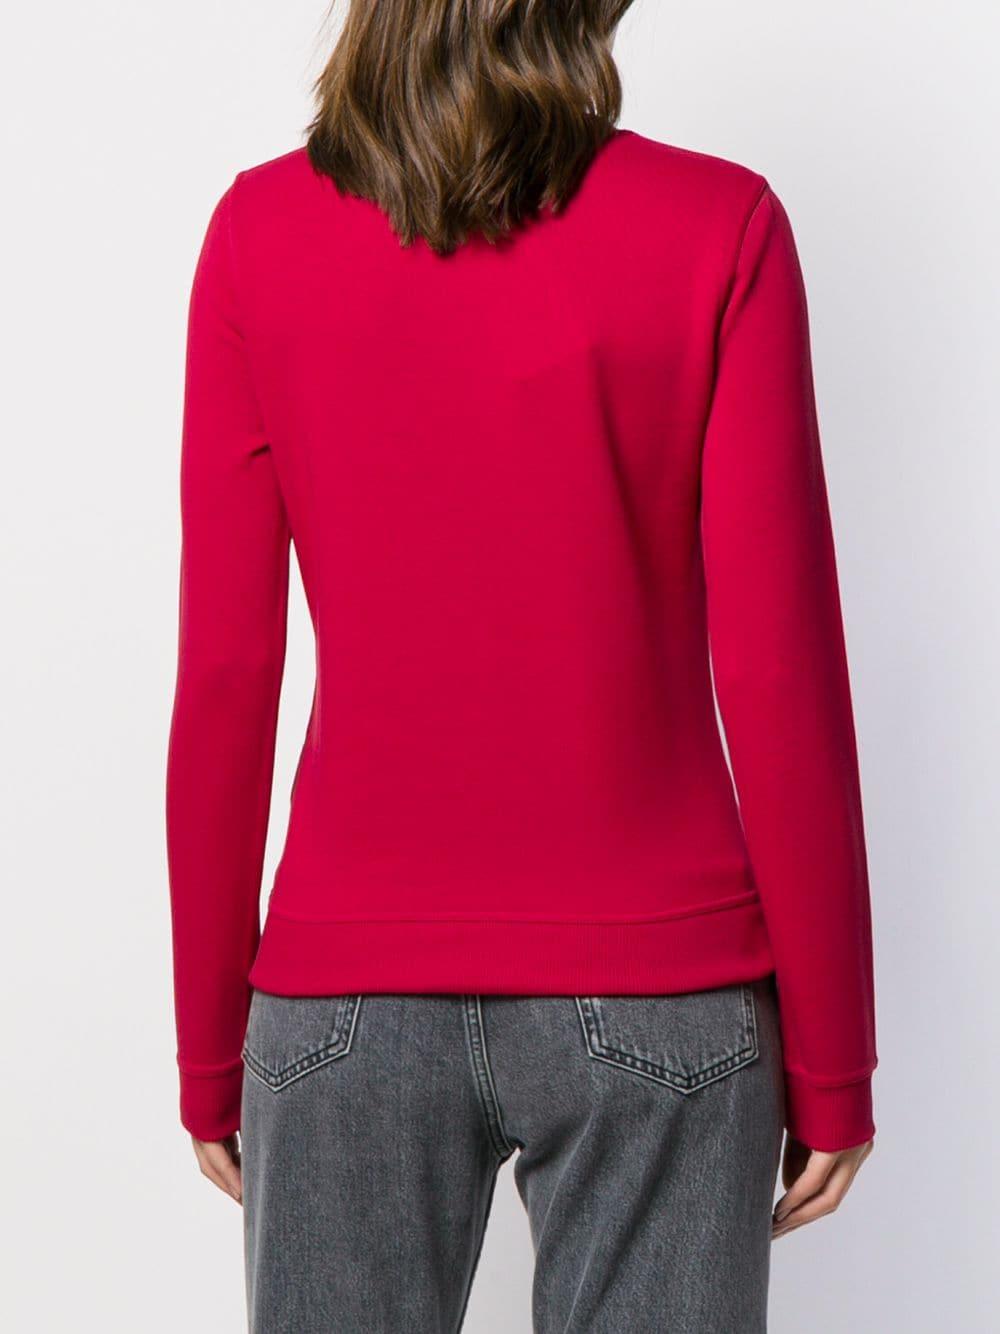 KENZO Synthetic Logo Jumper in Red - Lyst